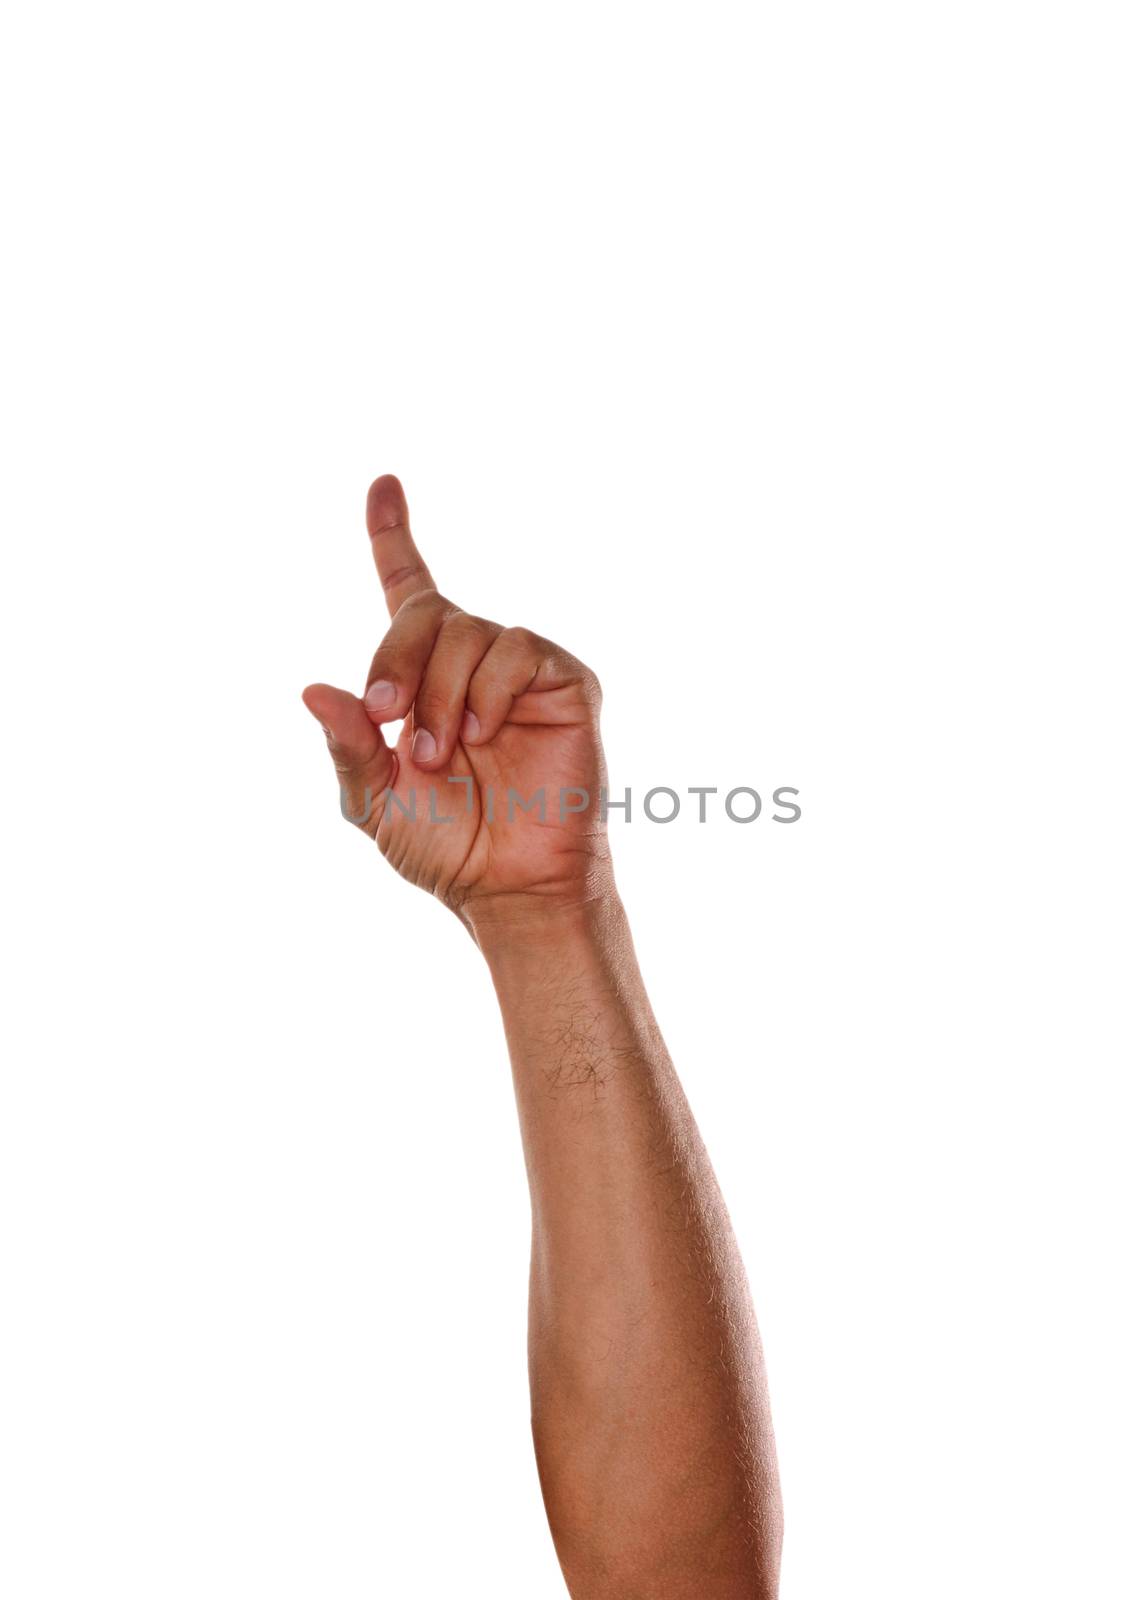 man's hand making number one sign with index finger isolated on white background 